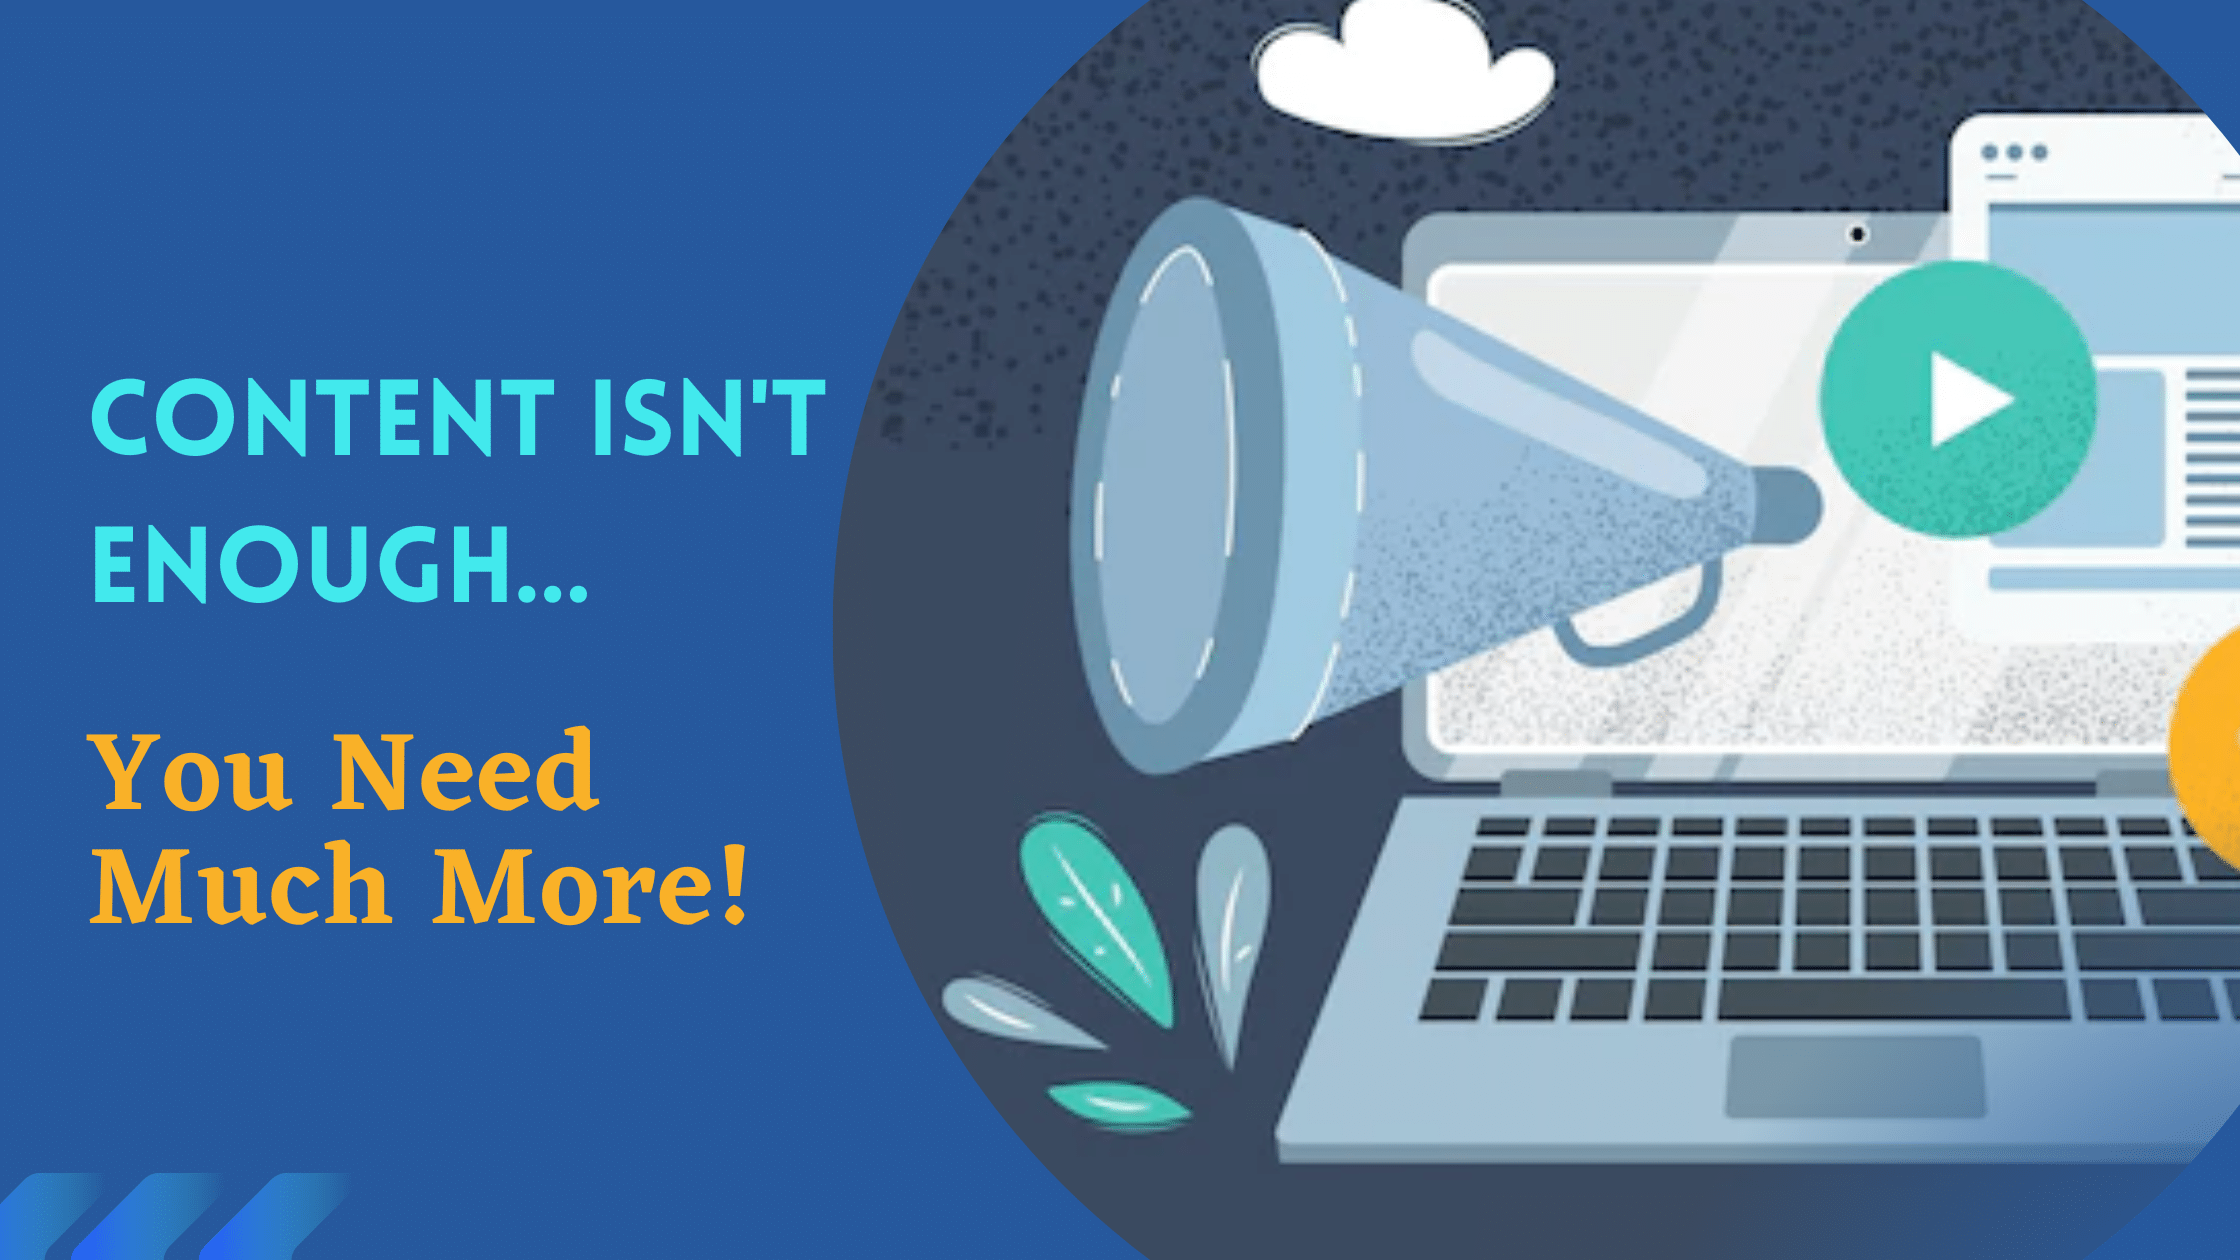 Content Isn't Enough… You Need Much More!